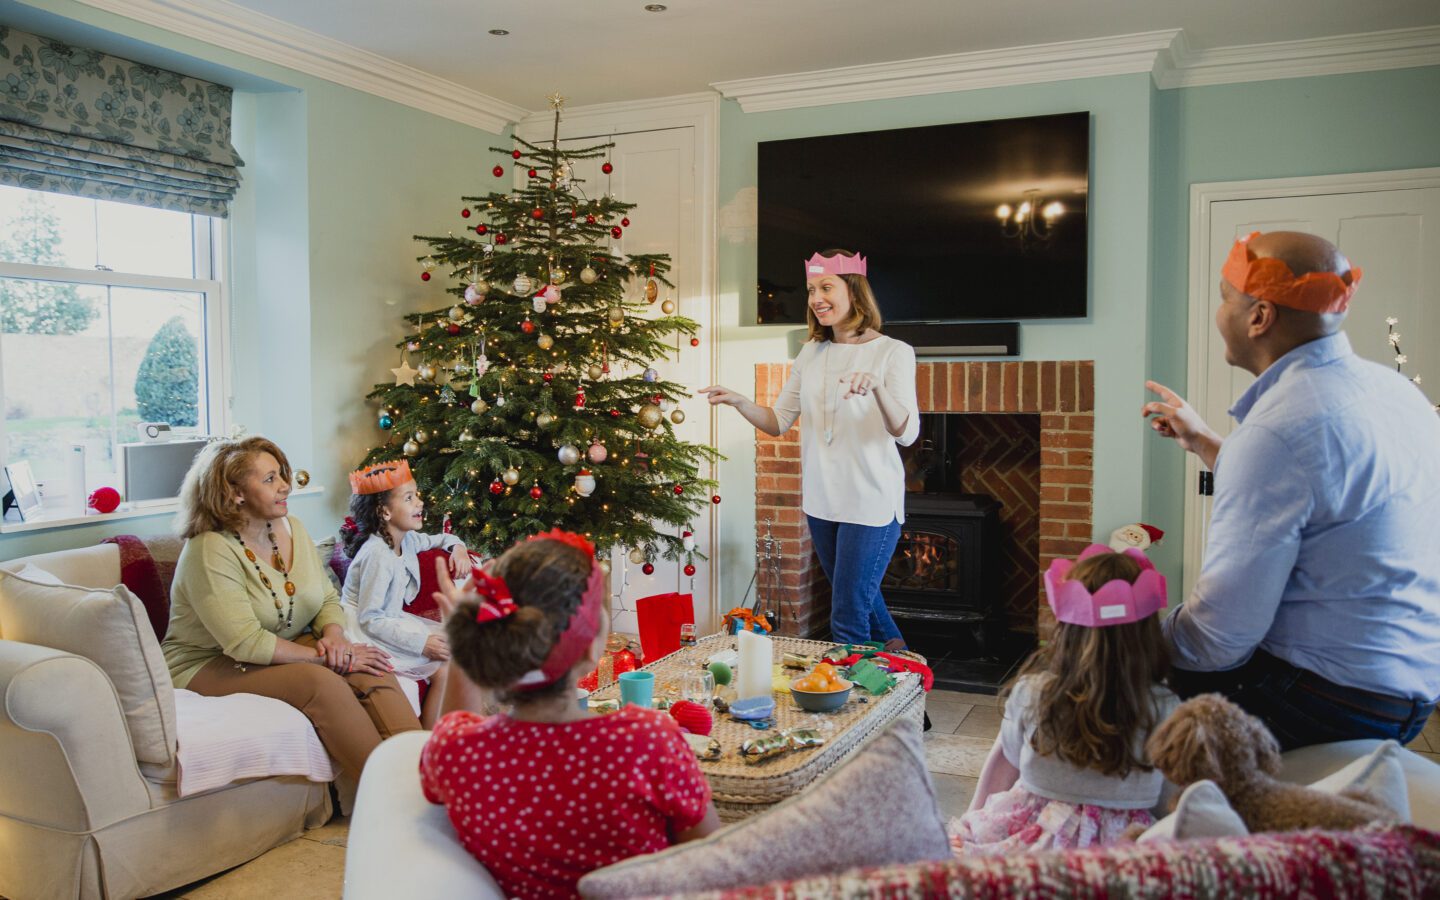 6 Tips to Be More Present at Christmas